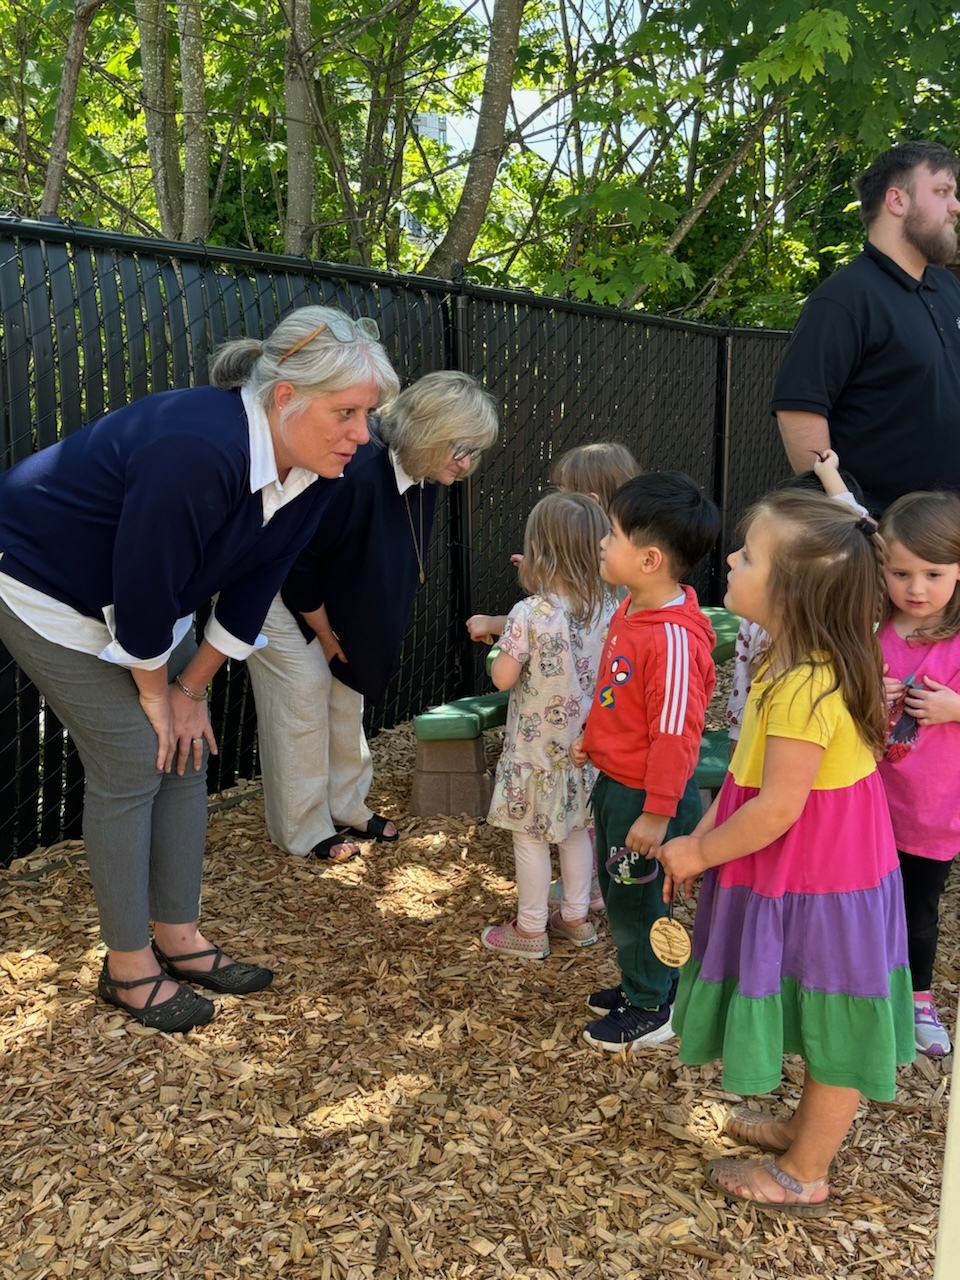 Councilmember Balducci with First Spouse Trudi Inslee and children at Harborview Childcare Center